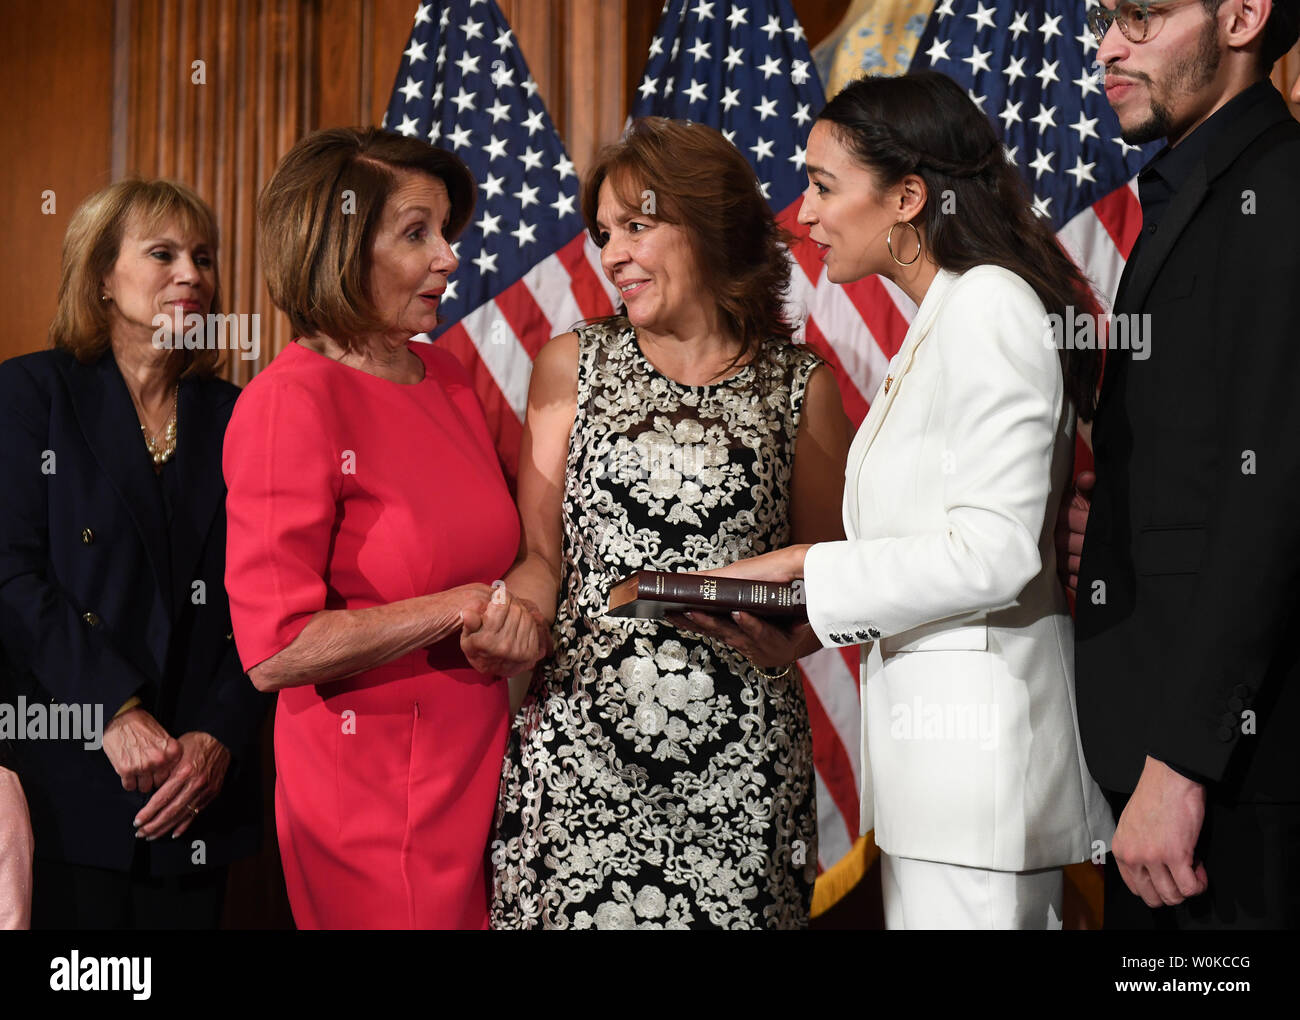 Newly elected Speaker of the House Nancy Pelosi talks with  Rep. Alexandria Ocasio-Cortez, D-NY, (in white) at a mock swearing-in event with family members at the U.S. Capitol in Washington, DC on January 3, 2019.  Pelosi became the first official to return to that position since Sam Rayburn in 1955.  Ocasio-Cortez is the youngest woman ever in Congress at age 29.     Photo by Pat Benic/UPI Stock Photo